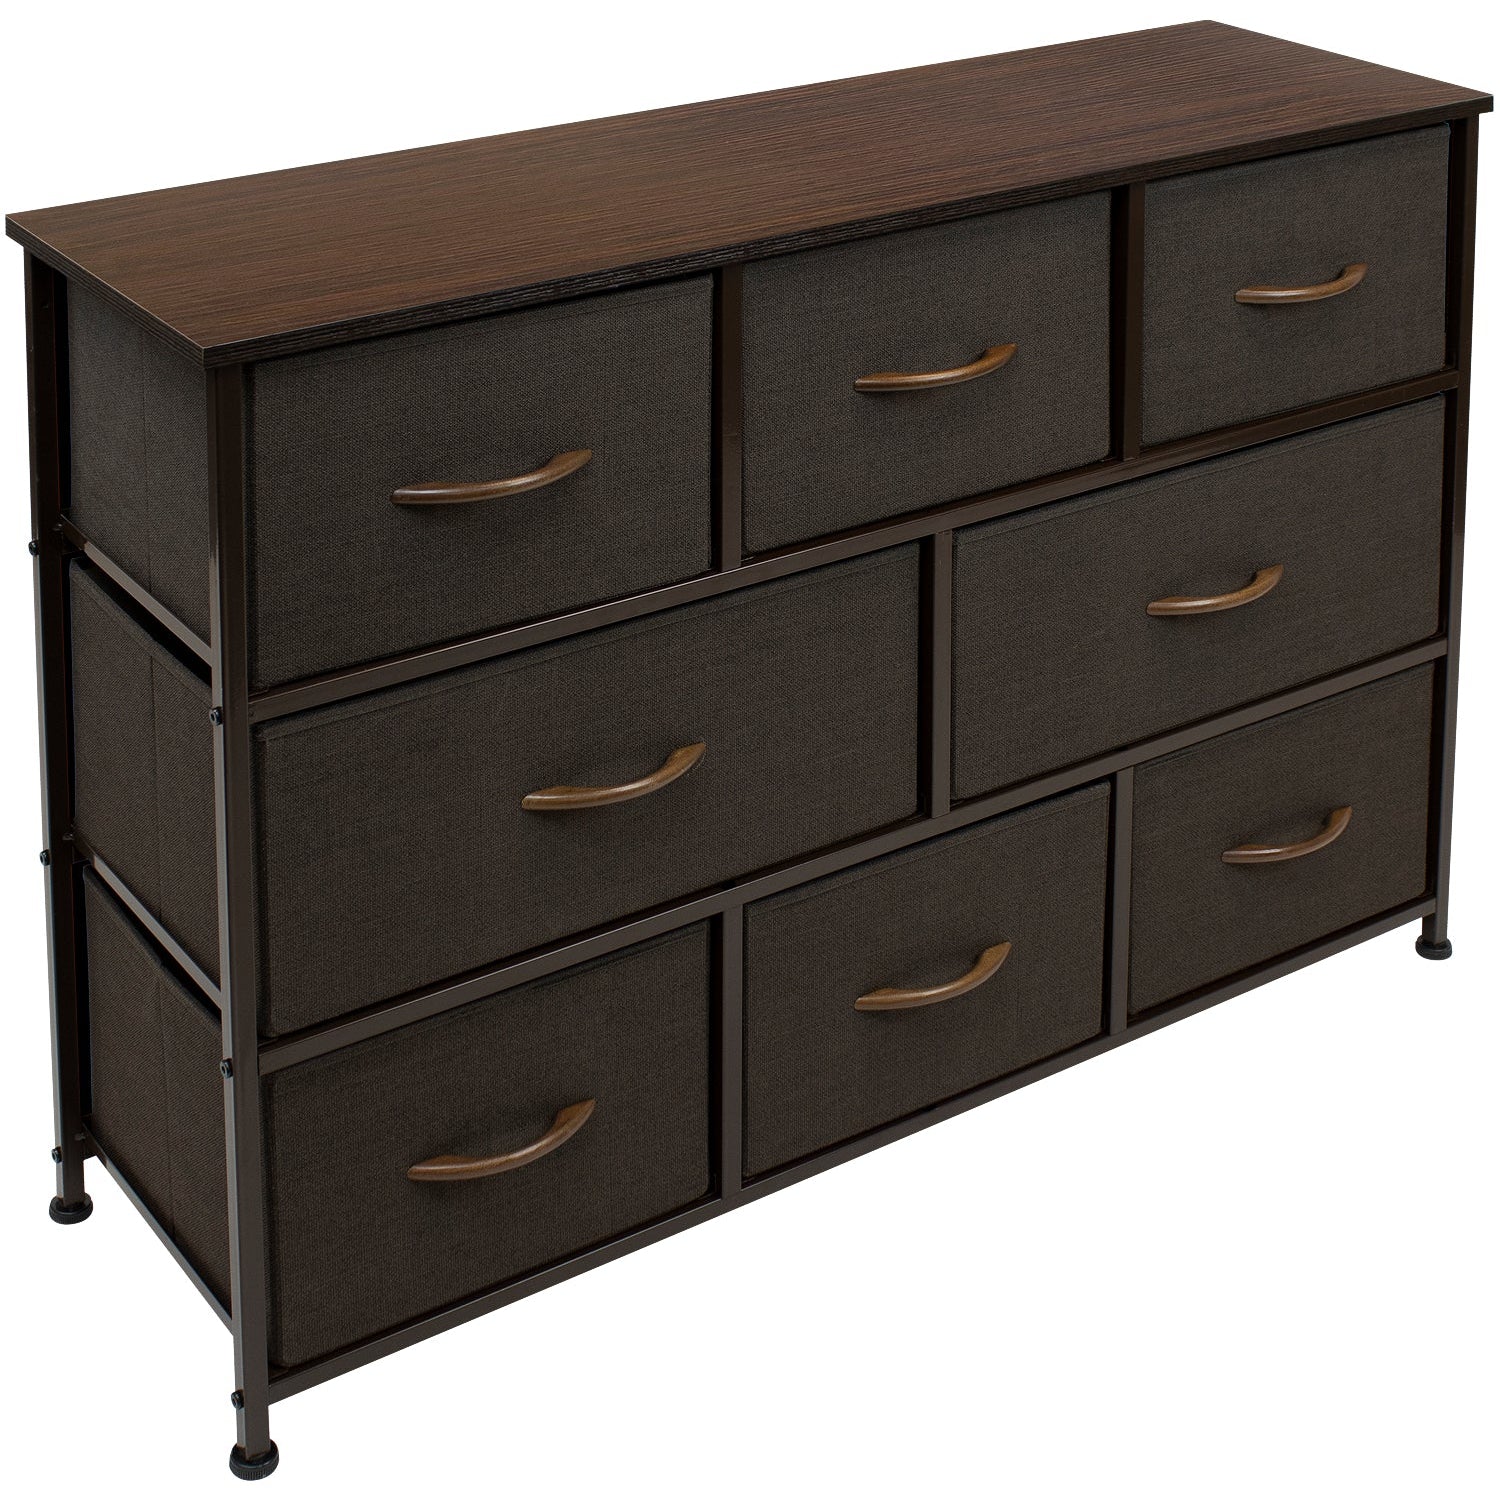 Sorbus 8 Drawer shelf for Bedroom, home and office